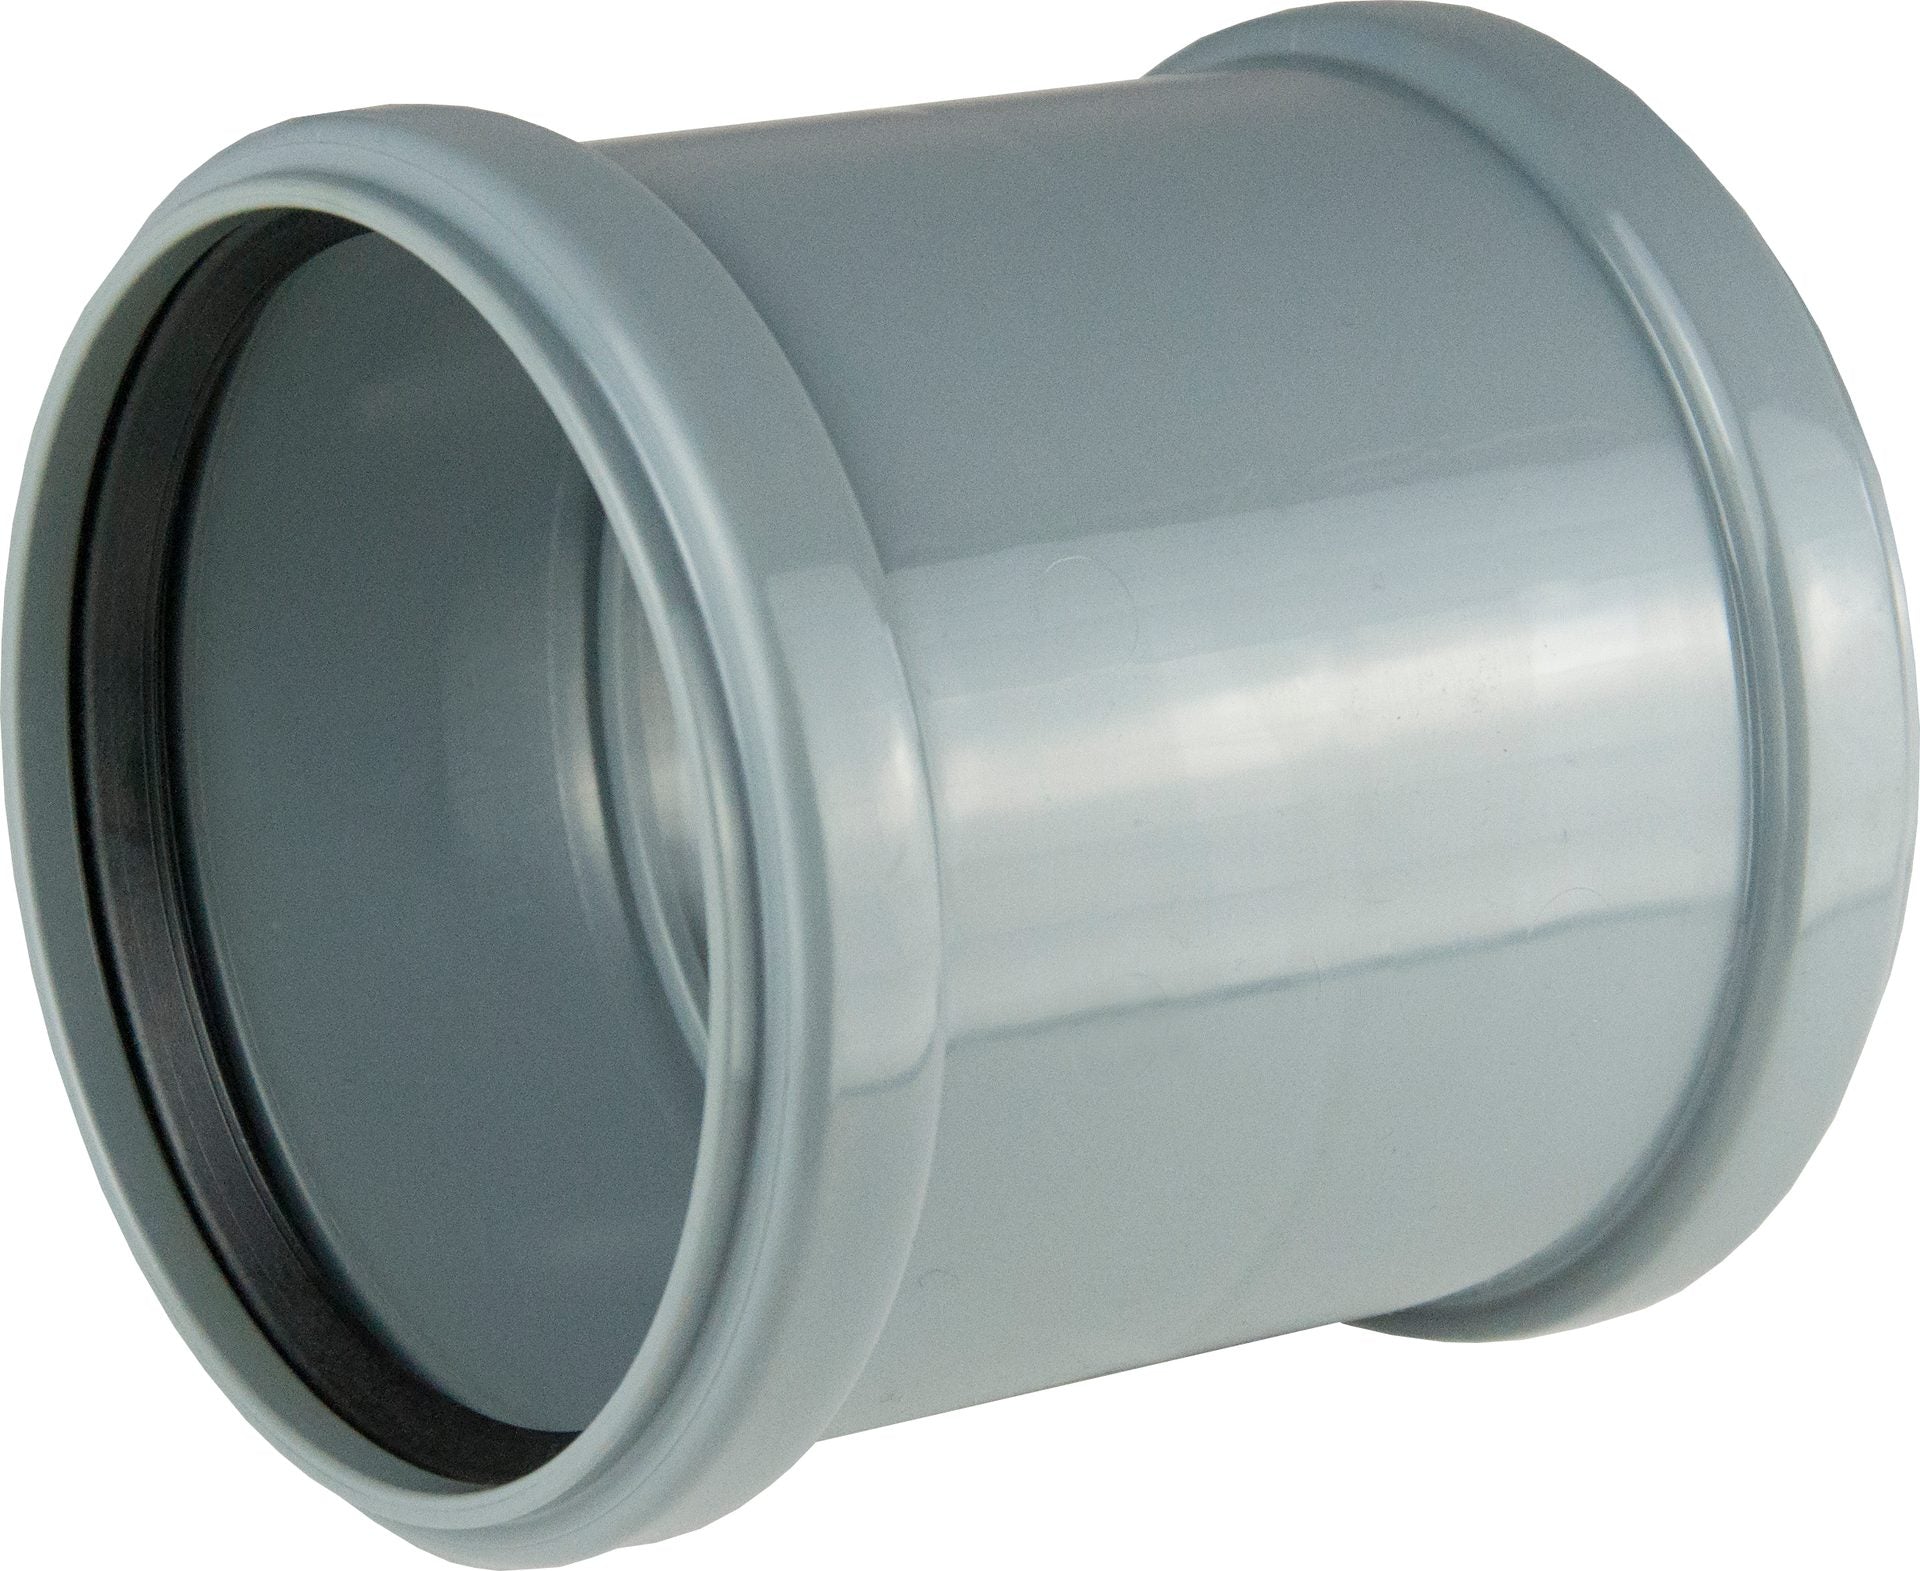 Coupling for indoor drain Kaczmarek Fonica PP HT Gray with center stop